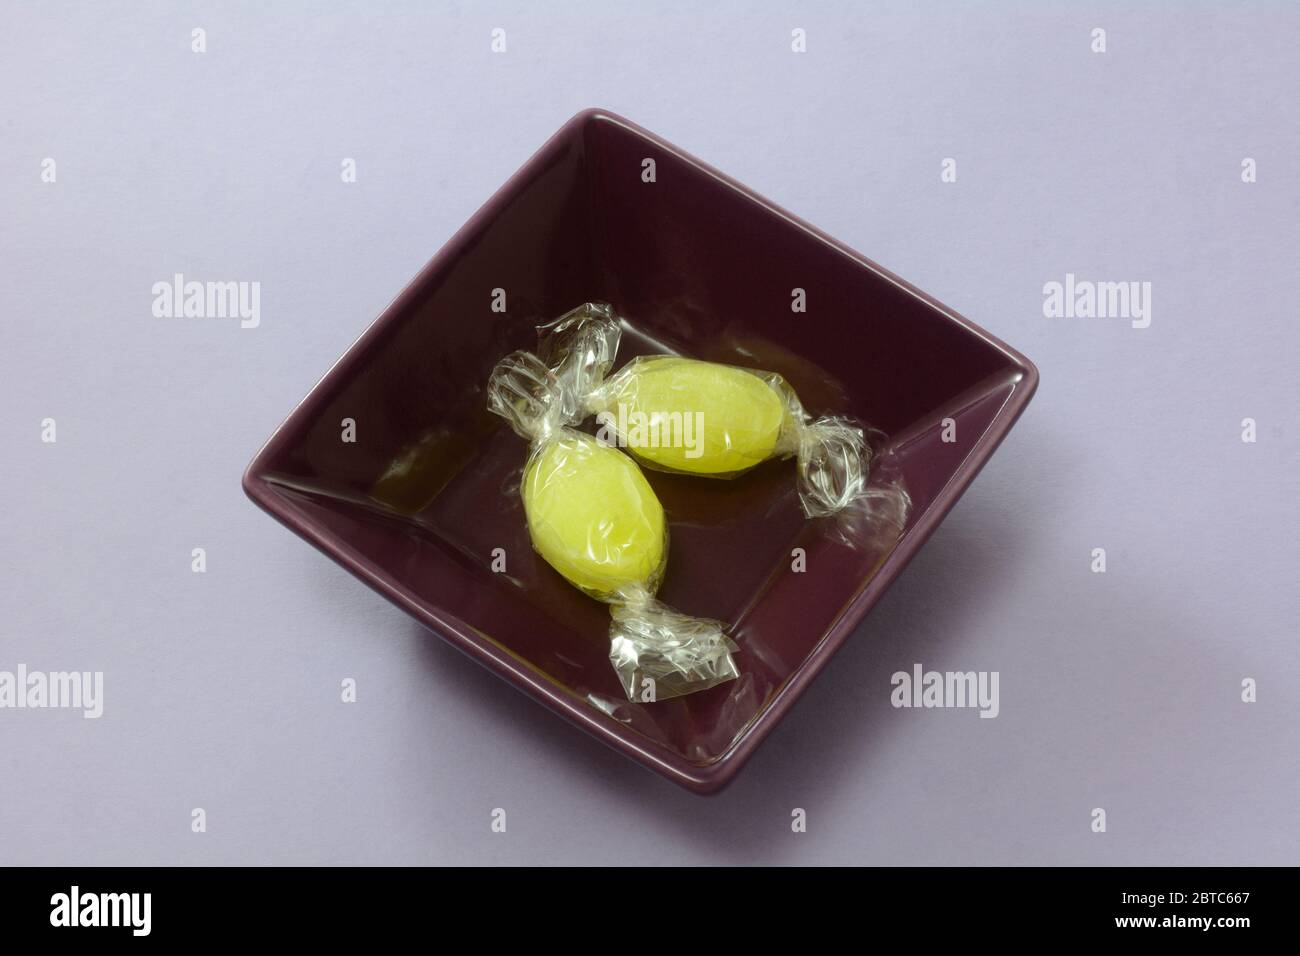 Sherbet lemon drop hard candy in plastic wrapper in purple square bowl on lavender background Stock Photo